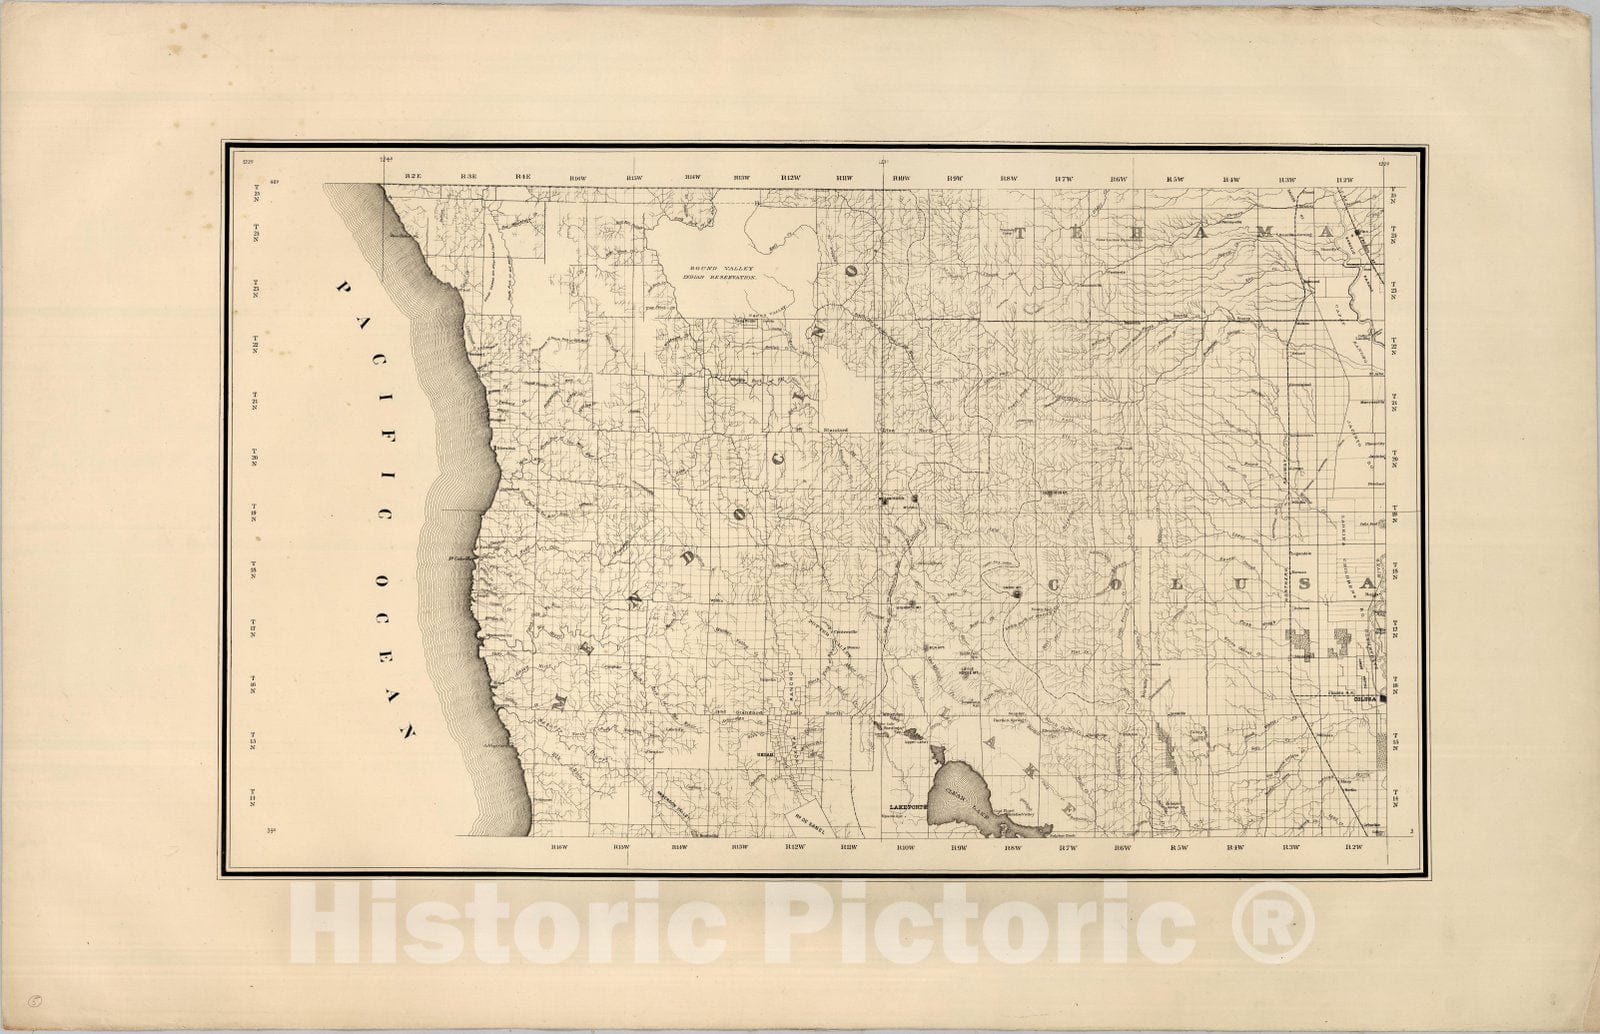 Historic Wall Map : State Engineer's Map of Northern California, Northern California, Mendocino County (sheet 5) 1884 - Vintage Wall Art